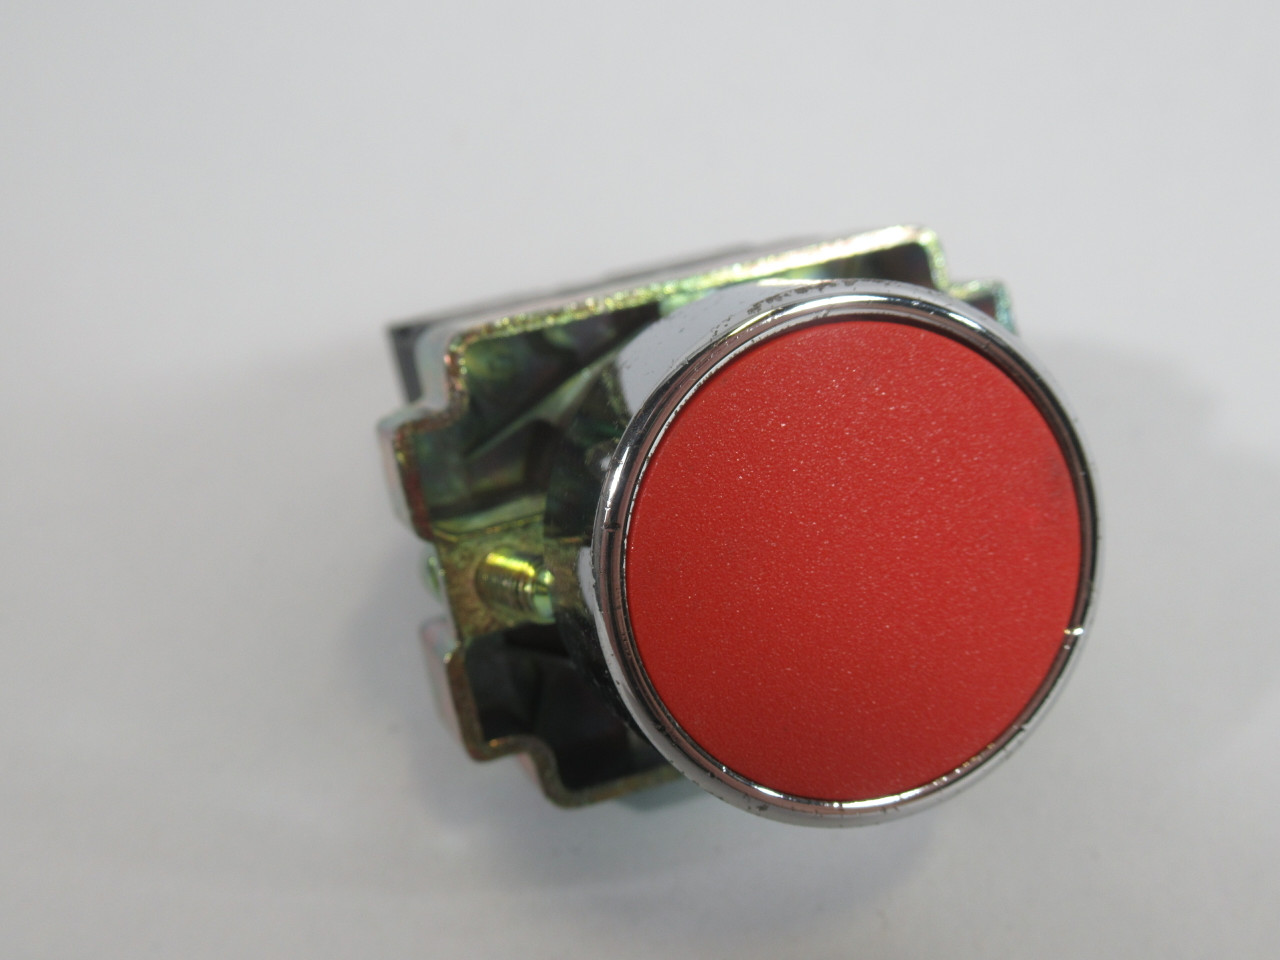 Chint NP2-BA42 Red Momentary Push Button 2NC 10A@415V ! NOP !